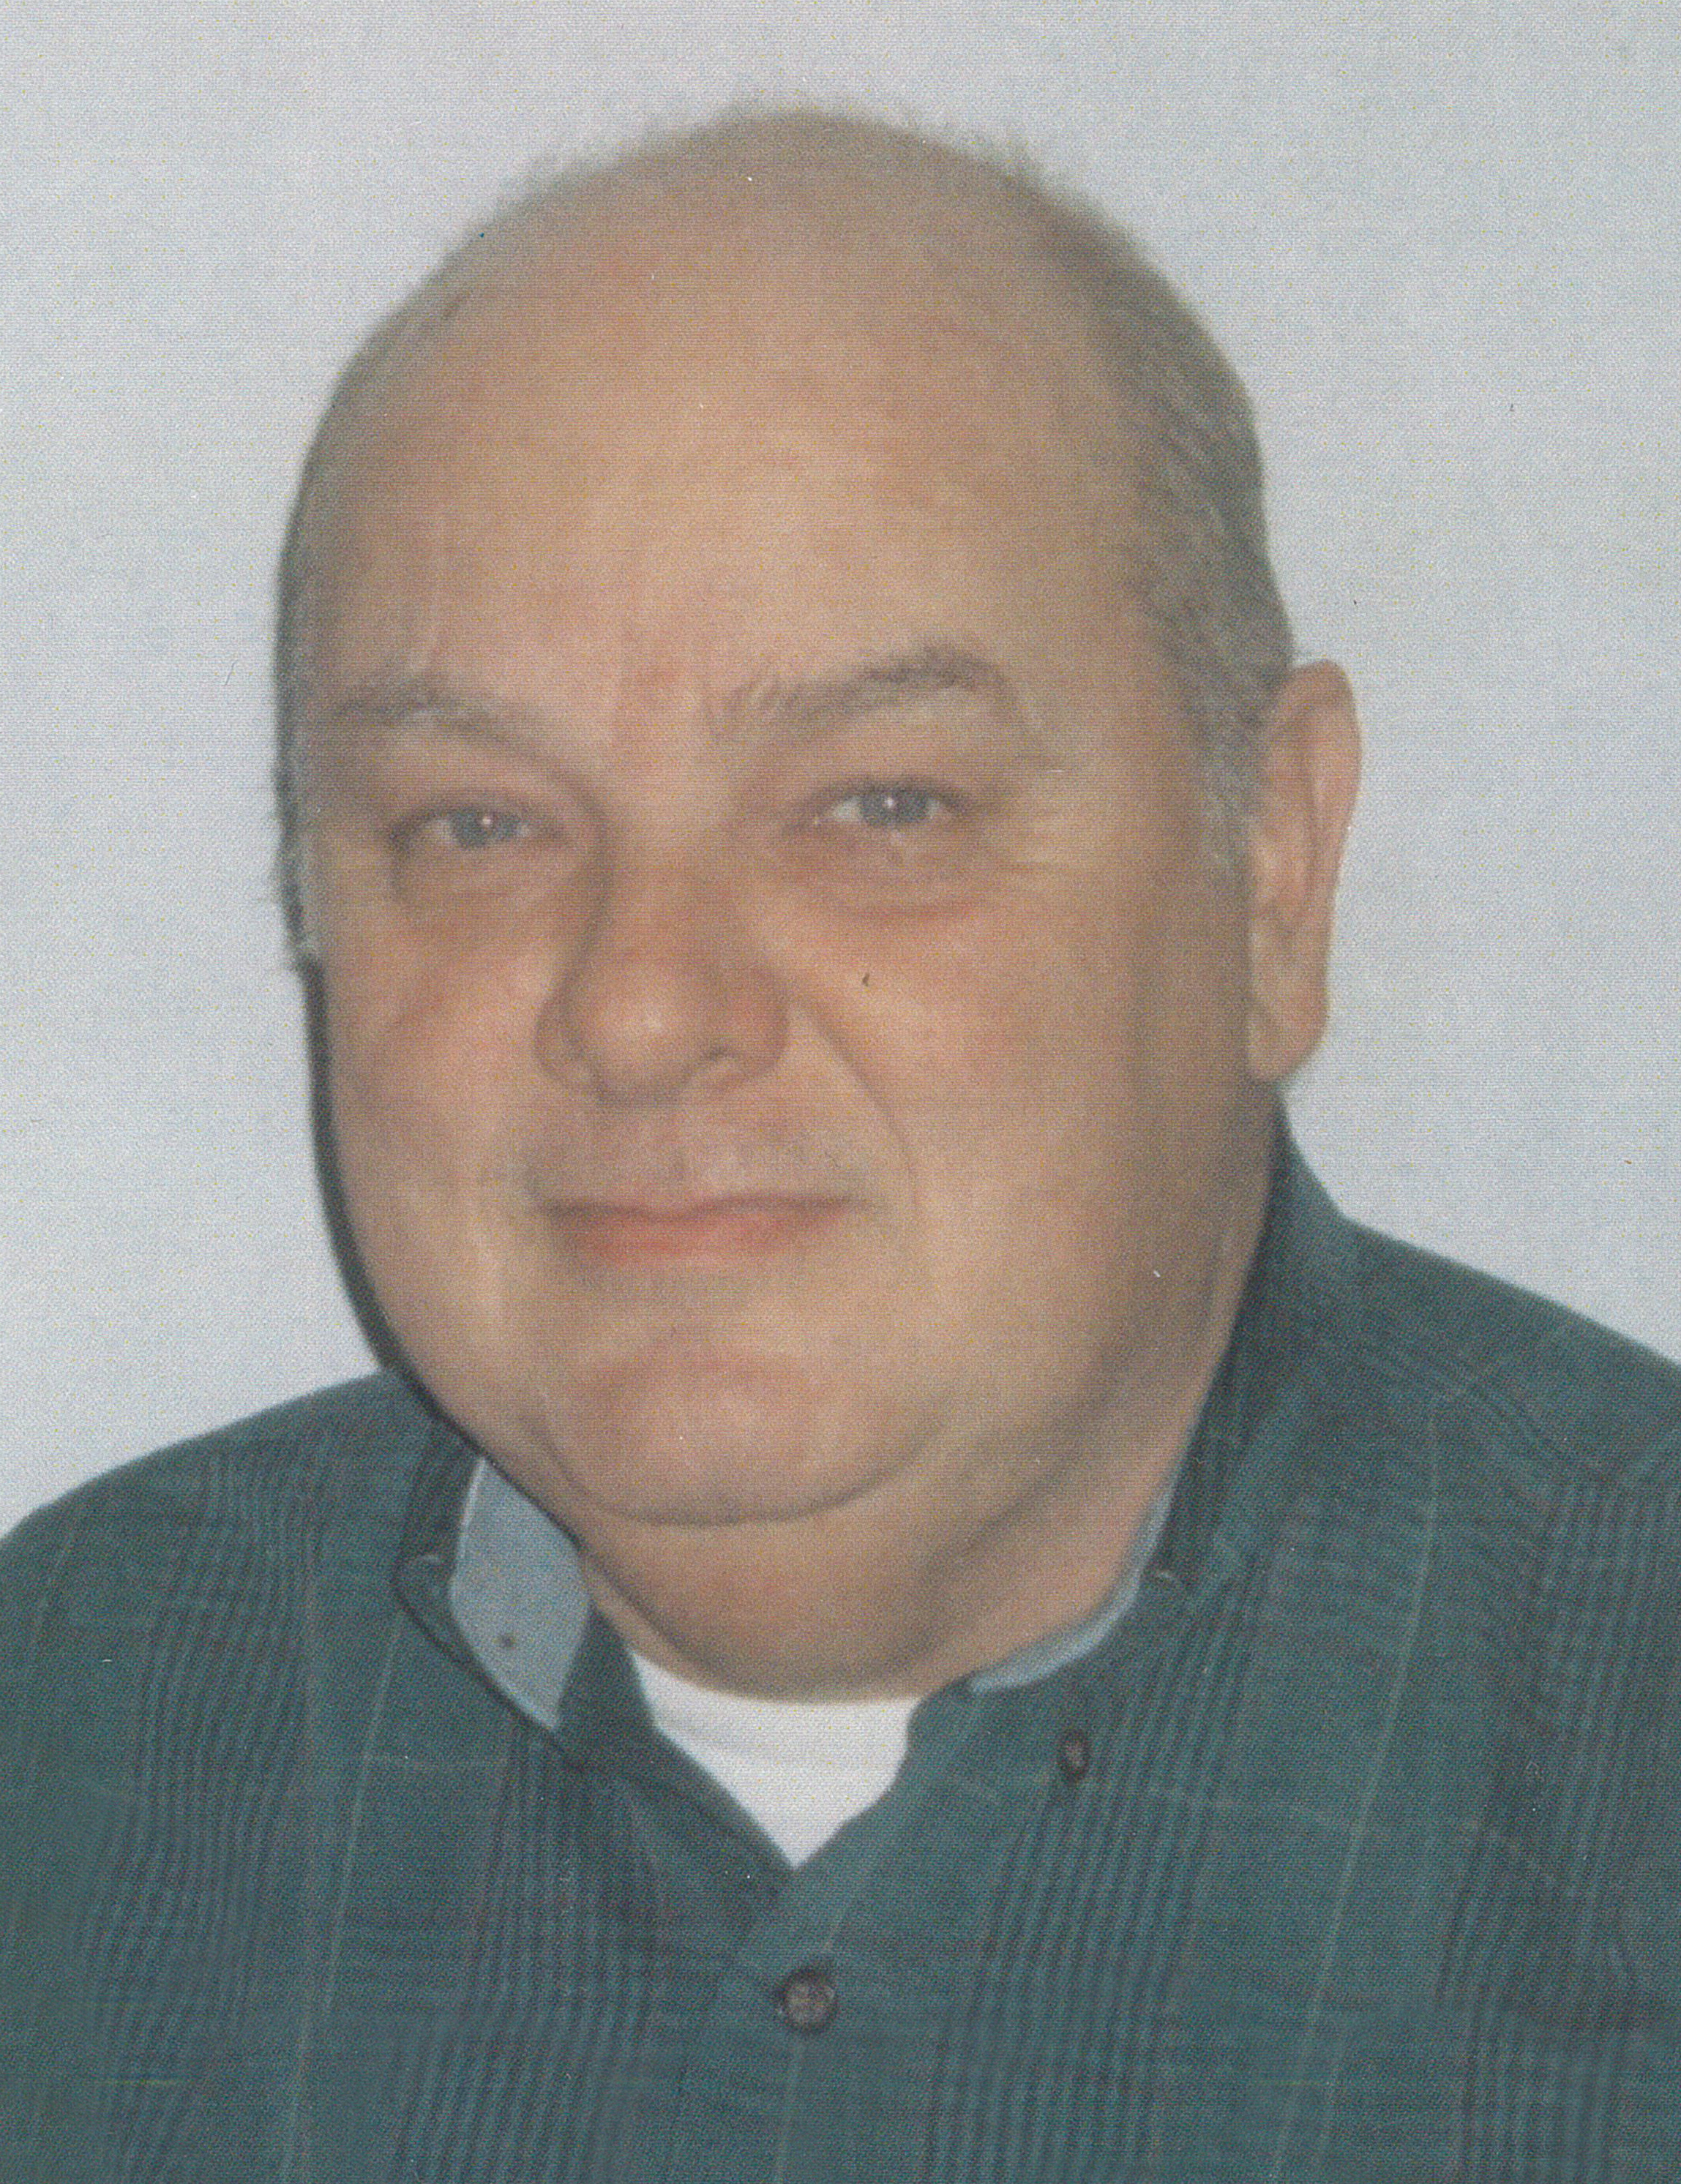 Obituary information for Dale A. Thrasher